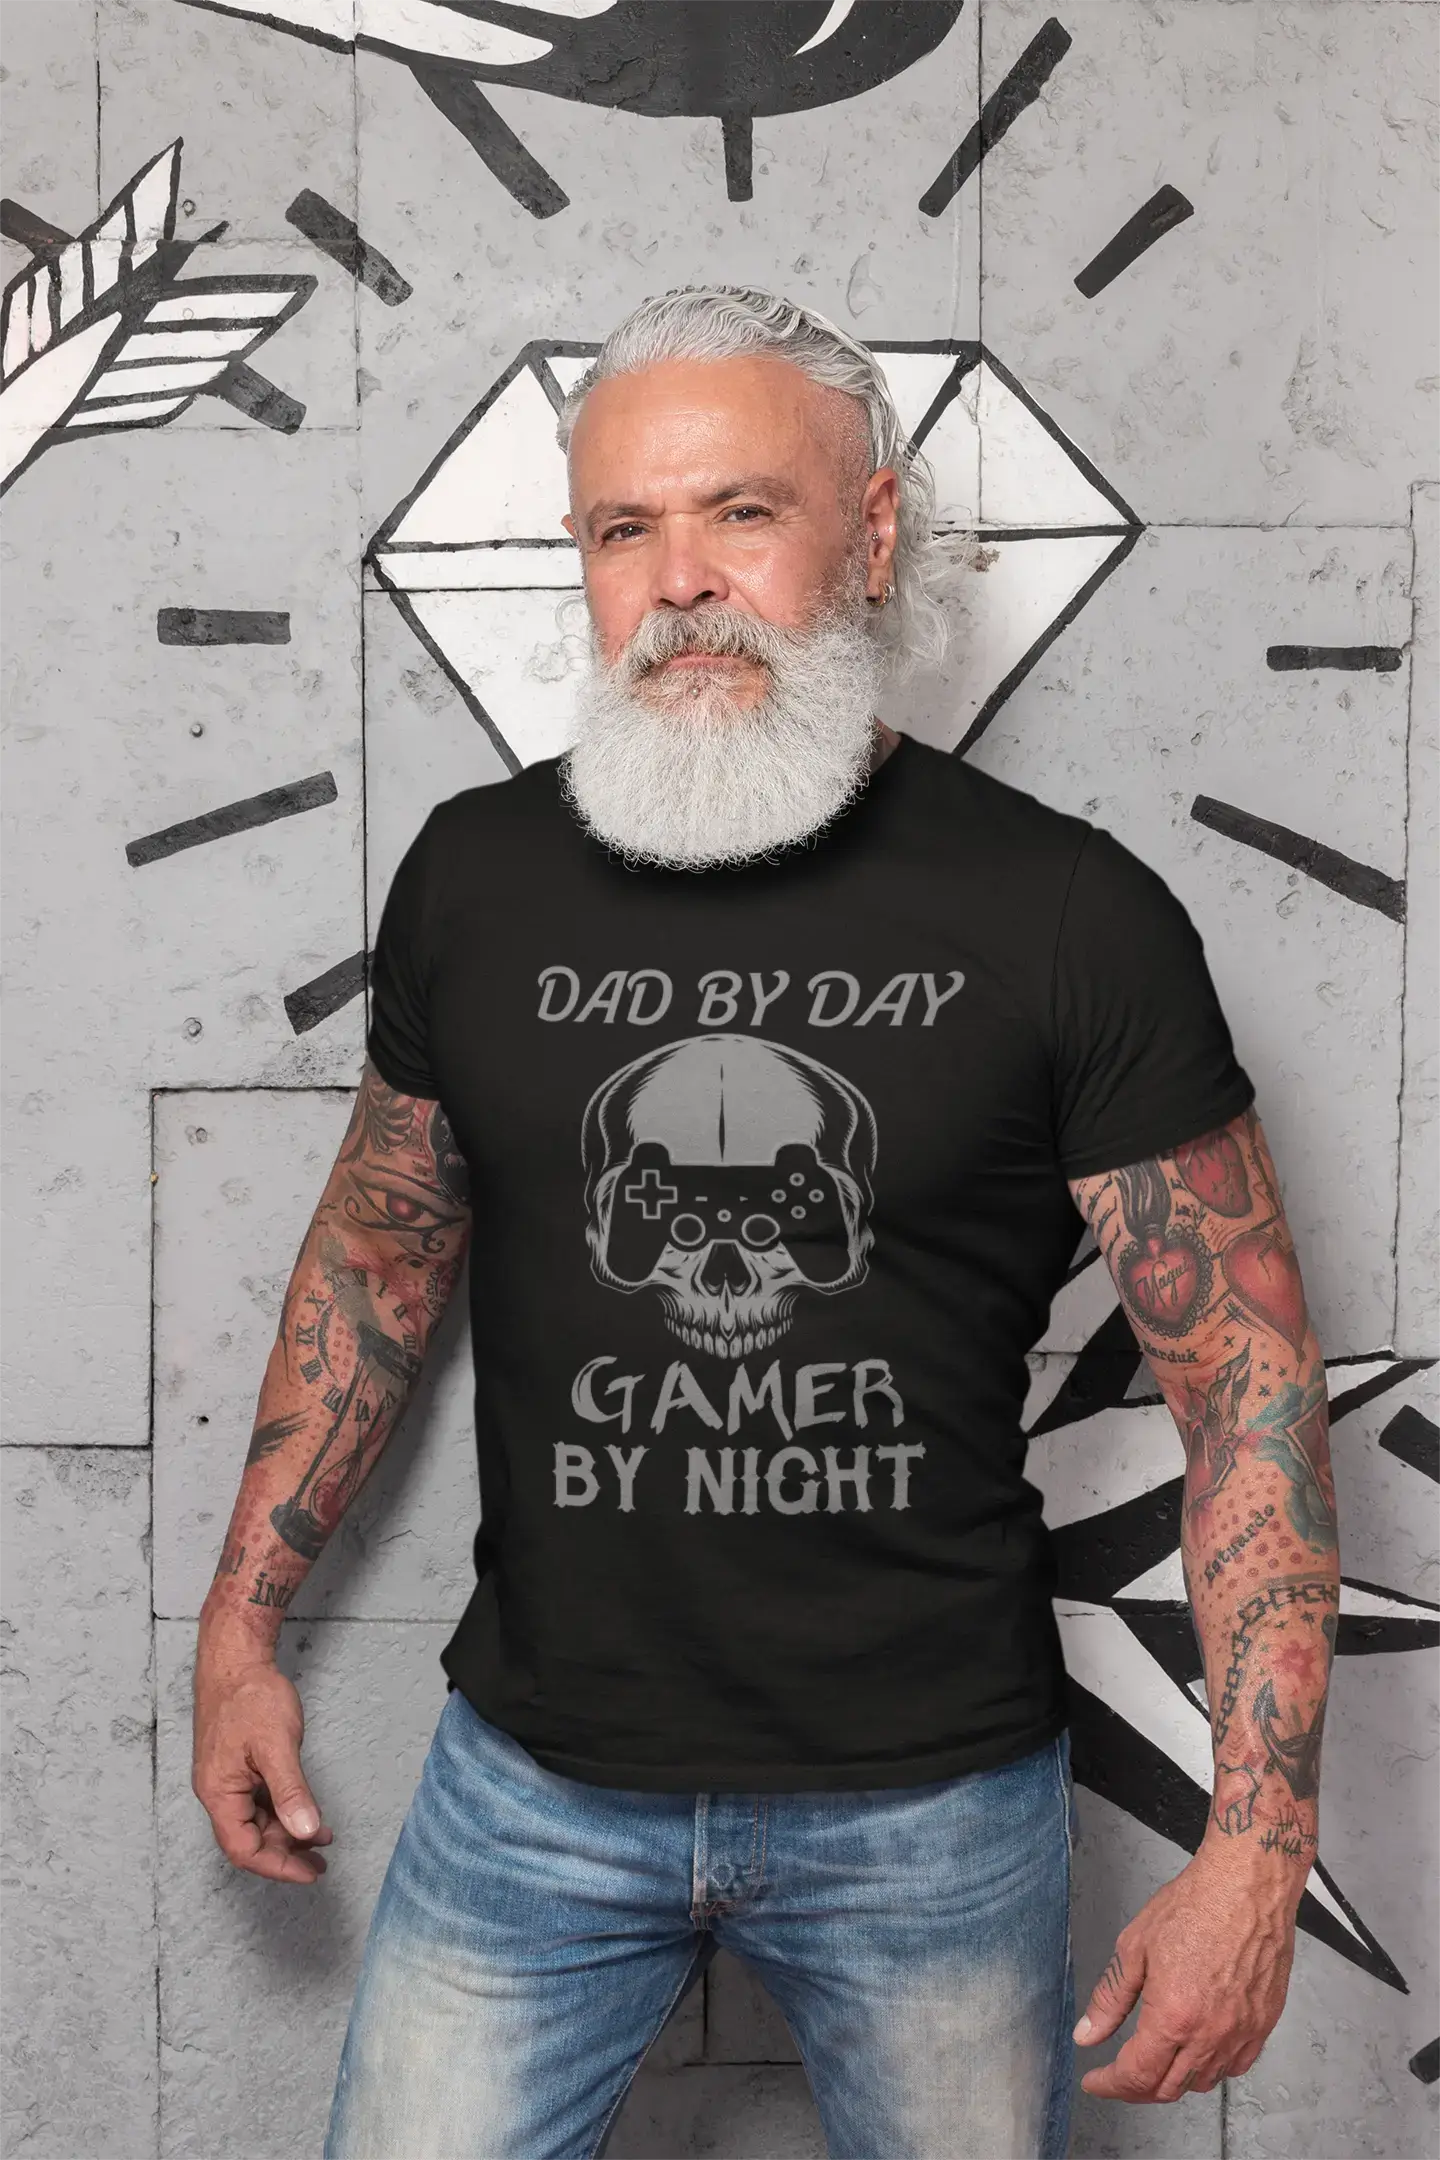 ULTRABASIC Men's Graphic Dad by Day Gamer by Night - Chemises assorties pour les pères